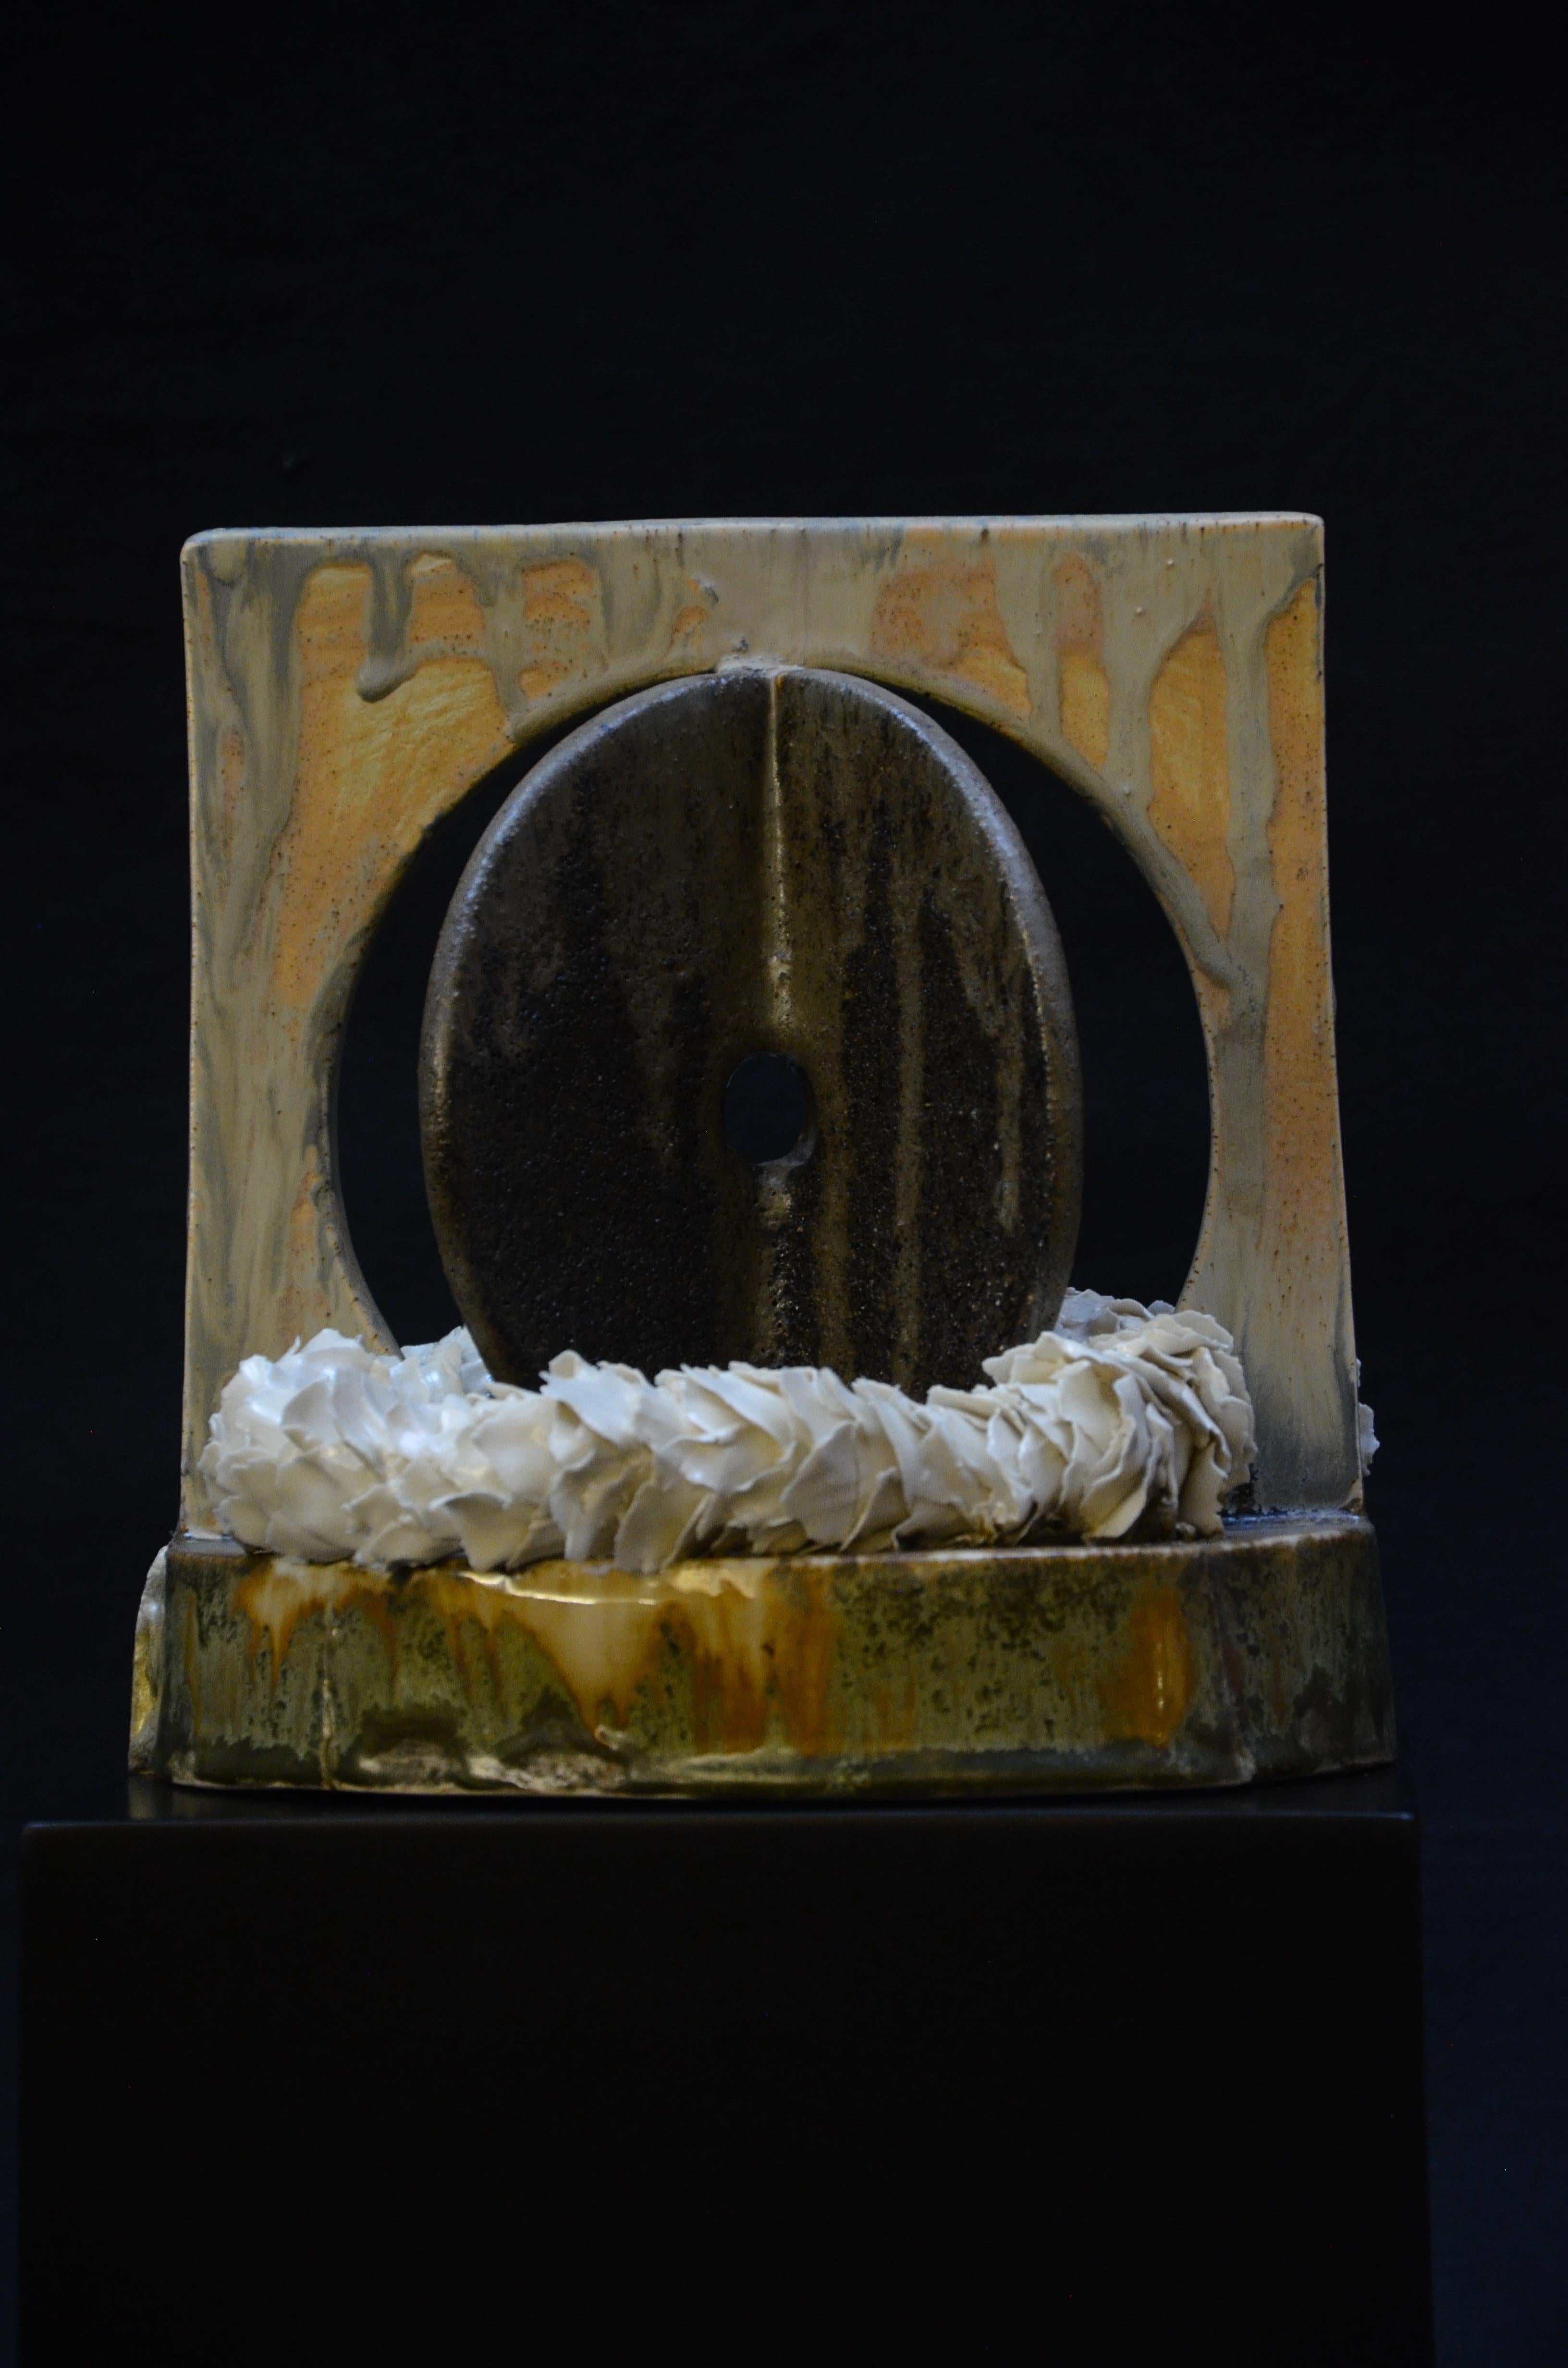 Rotten castle 4 sculpture by Vica Ceramica
Materials: High temp. Ceramic, Polished Cement base. 
Dimensions: D 25 x H 25 cm 

VICA CERÁMICA-STUDIO is a design and sculpture studio established in Mexico City
Vica's Mexican pottery is divided